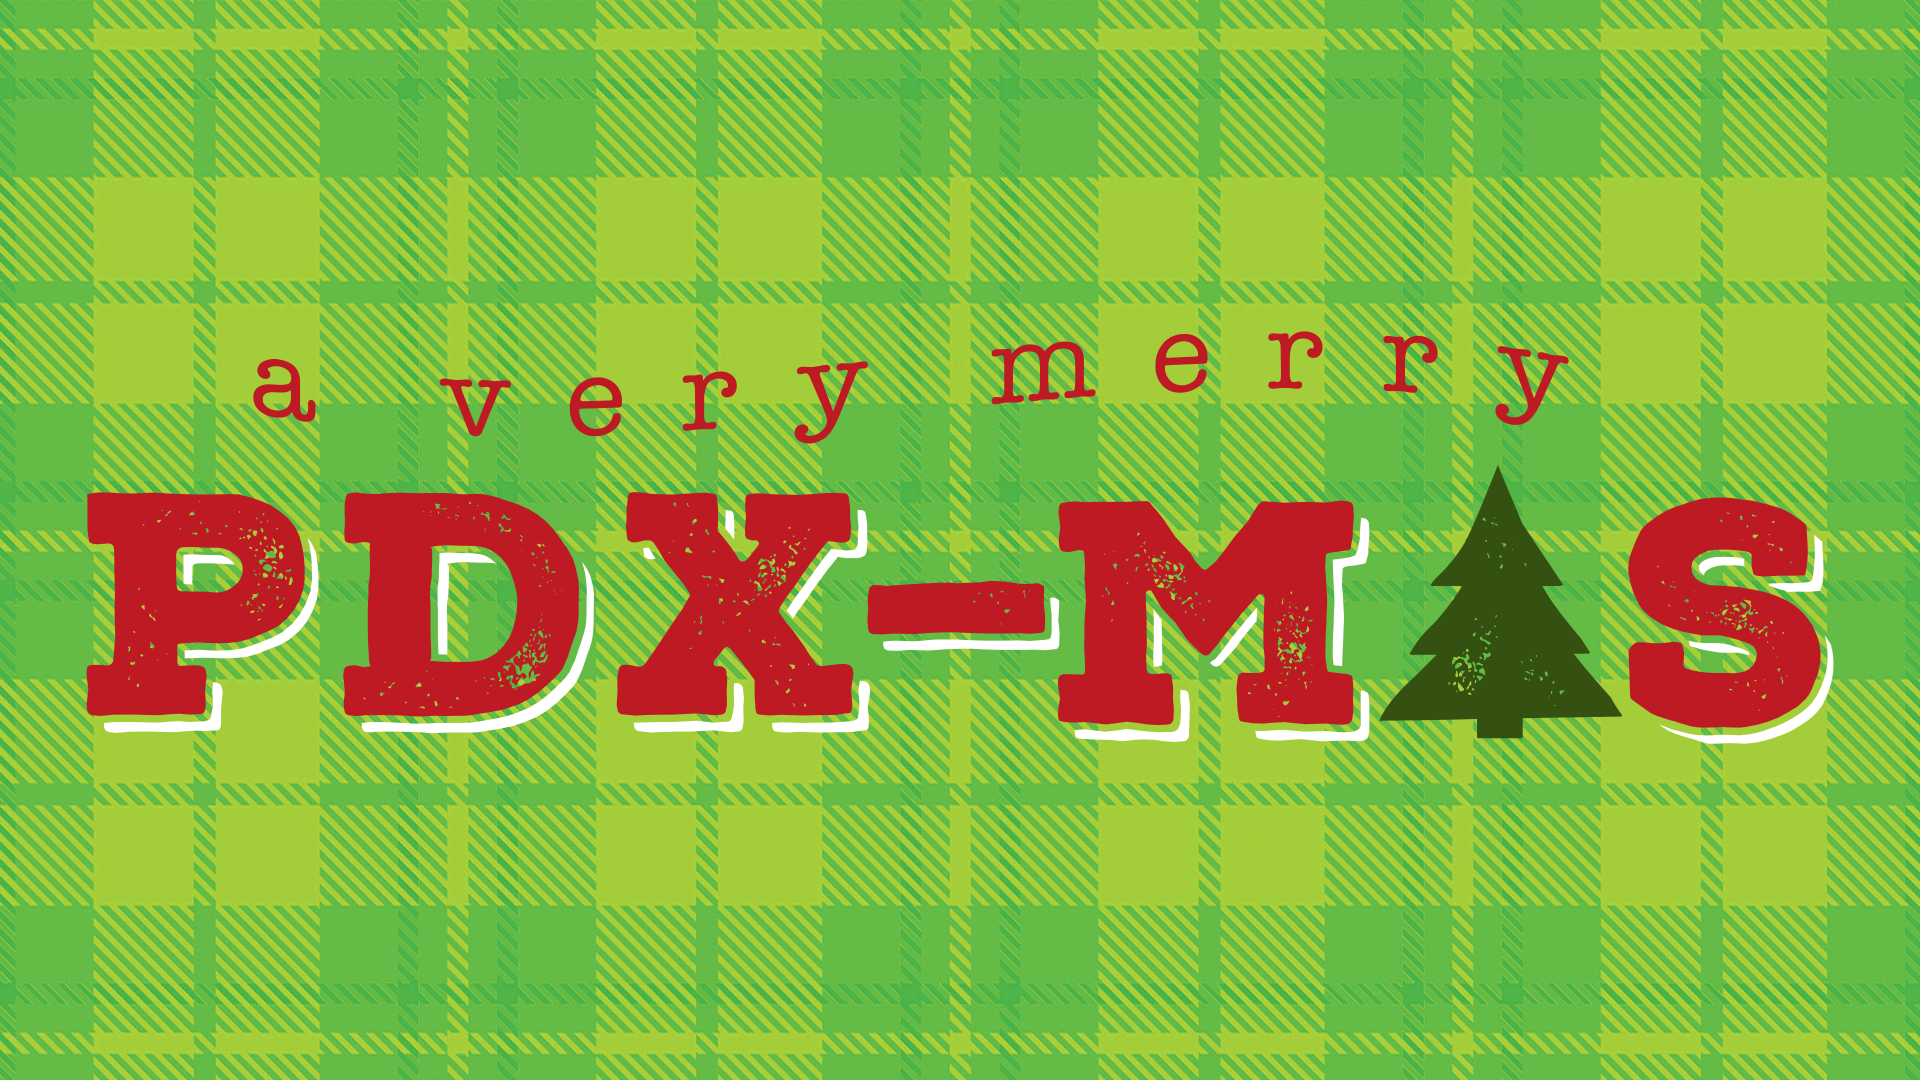 Logo for "A Very Merry PDX-Mas". Red lettering on a plaid green background.